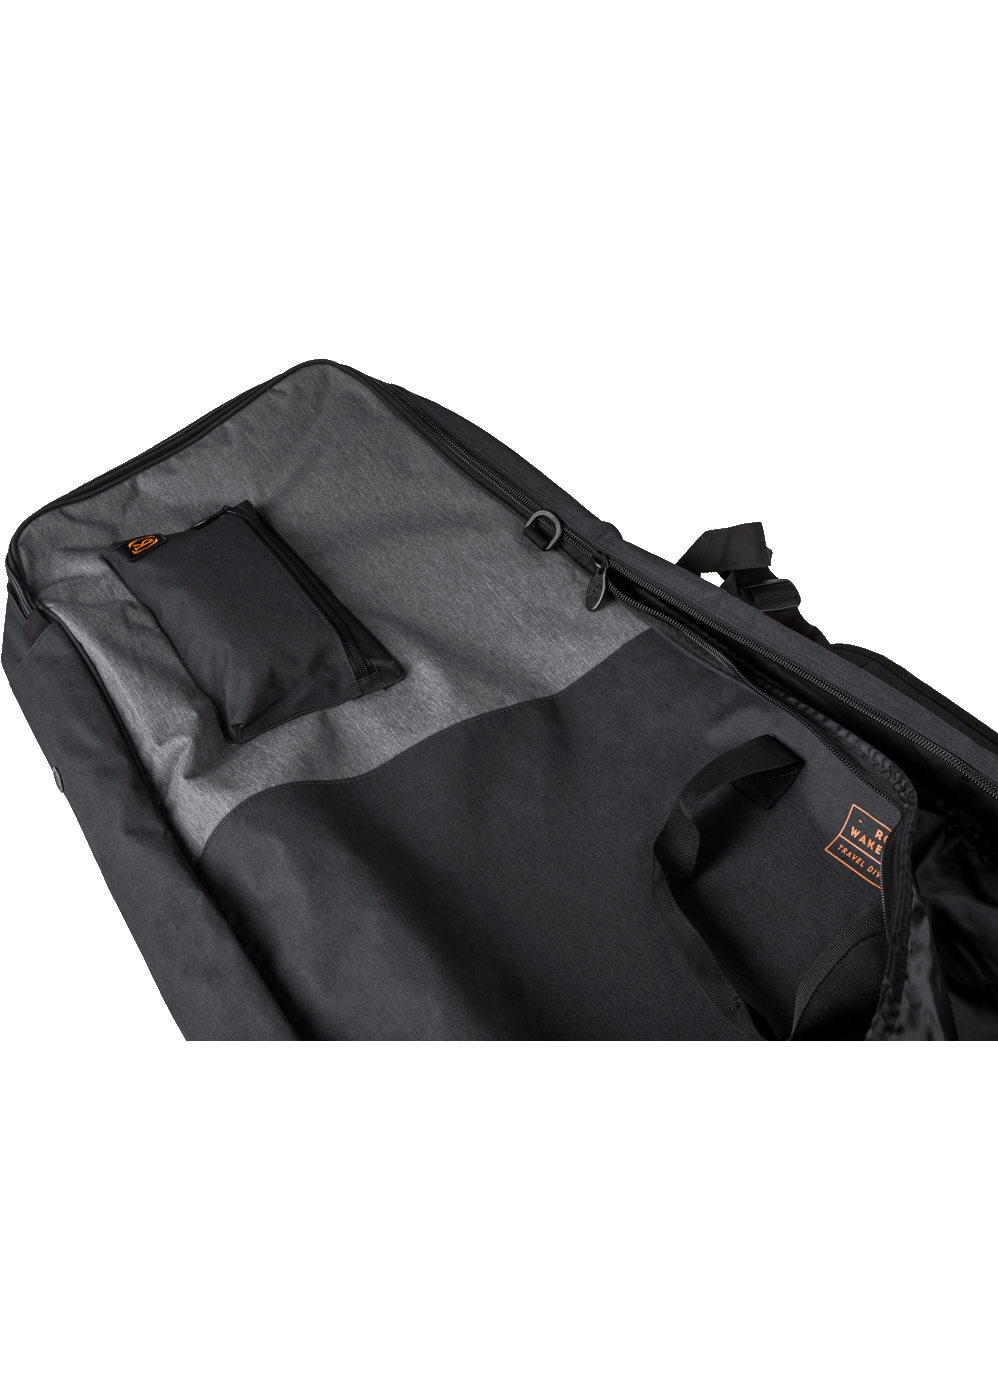 2022 Ronix Bags Collateral Non-Padded Board Case Inset 5